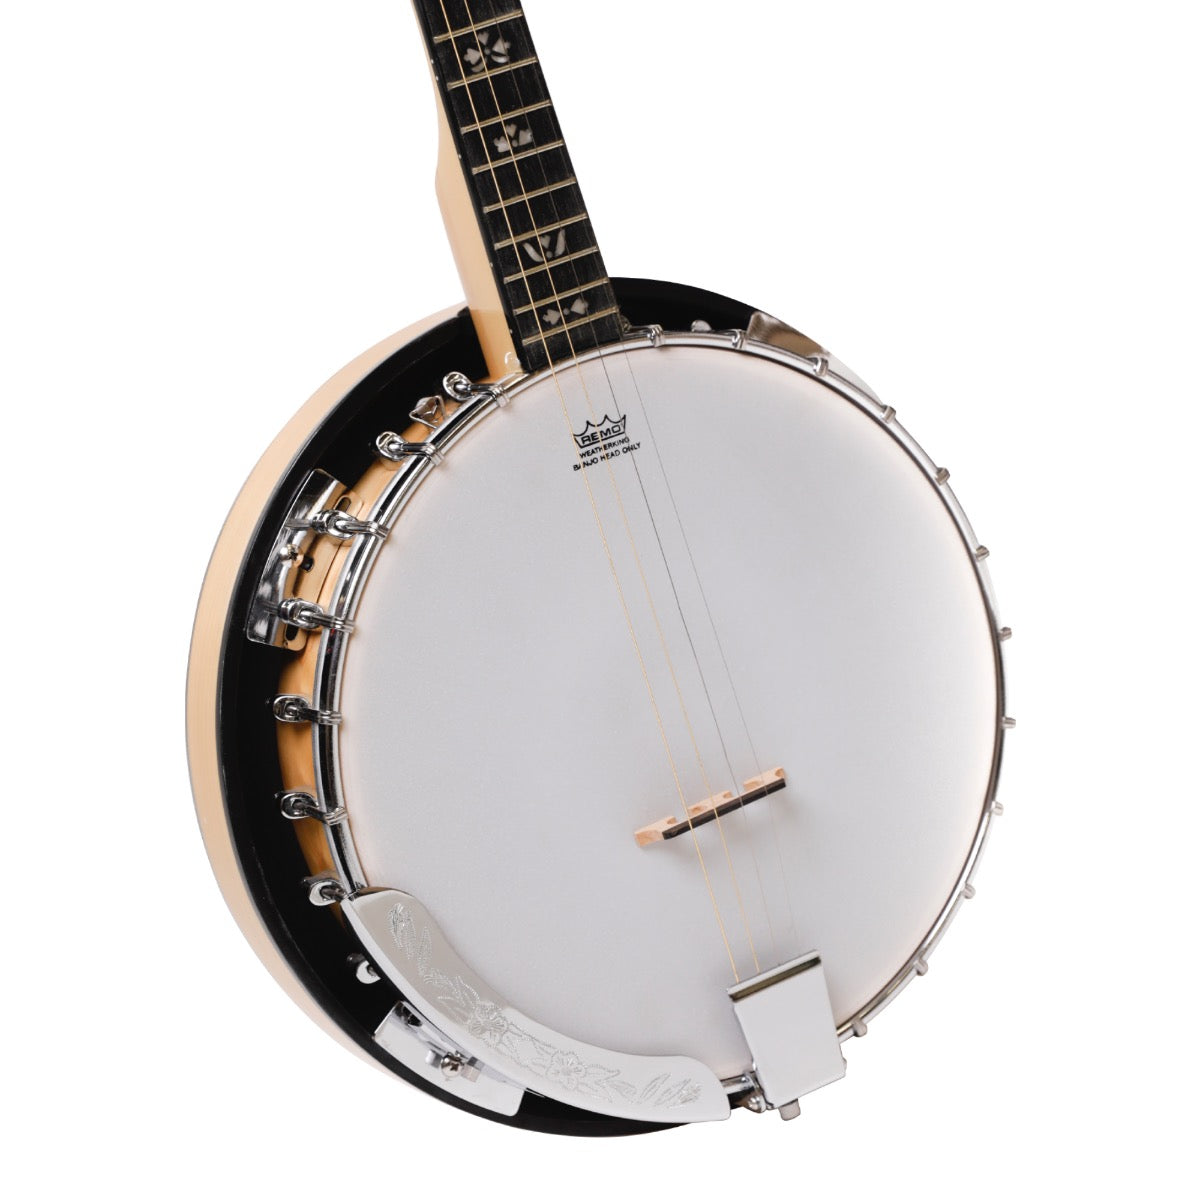 HEARTLAND DELUXE IRISH TENOR BANJO 17 FRETS WITH 24 BRACKET AND CLOSED SOLID BACK MAPLE FINISH